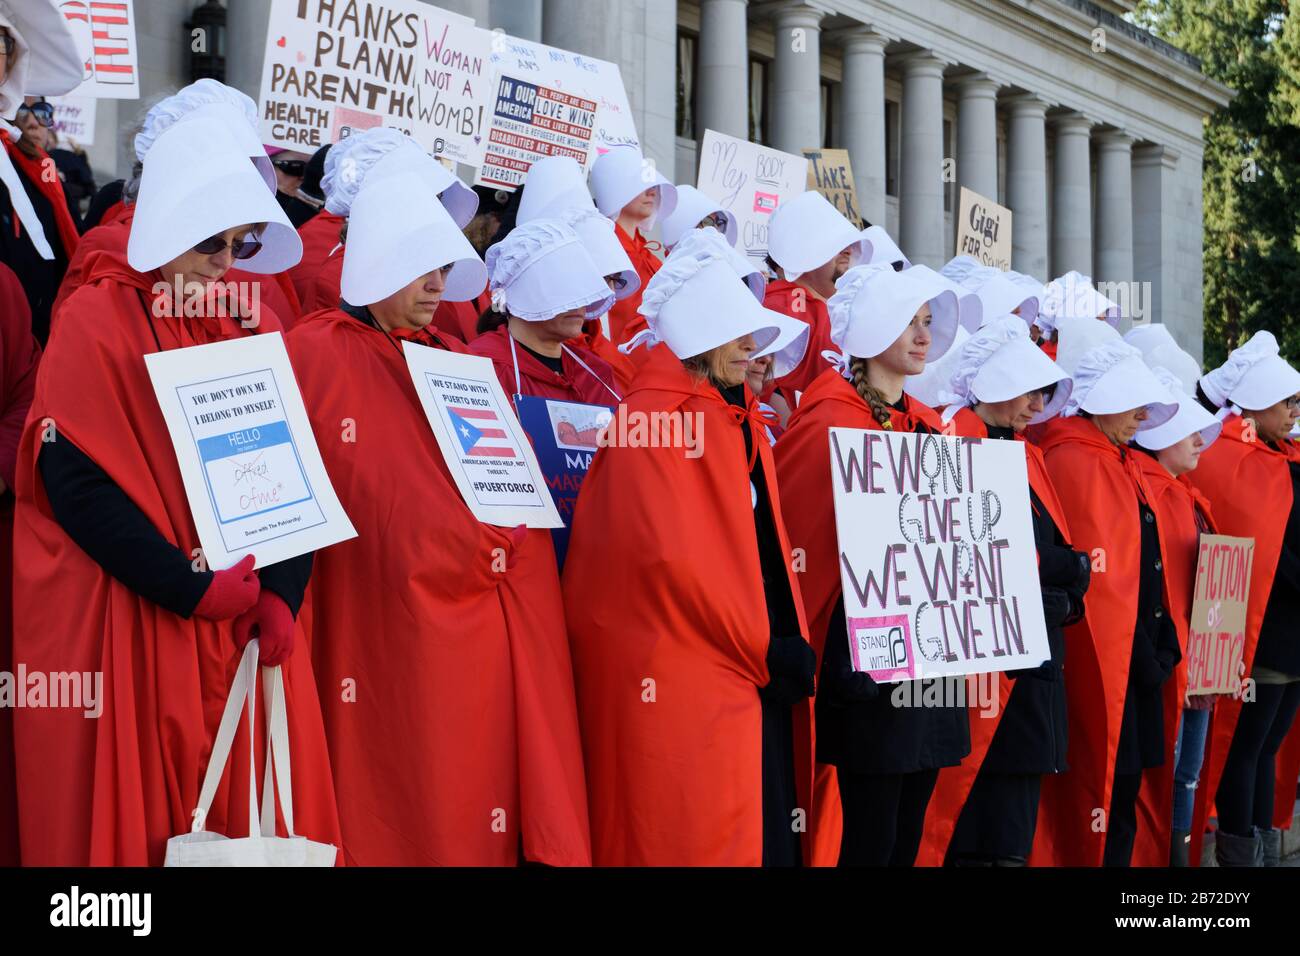 OLYMPIA, WA, OCTOBER 14, 2017: Men and women dressed in Handmaid's Tale costumes rally on the steps of Washington's state capitol to protest Trump adm Stock Photo